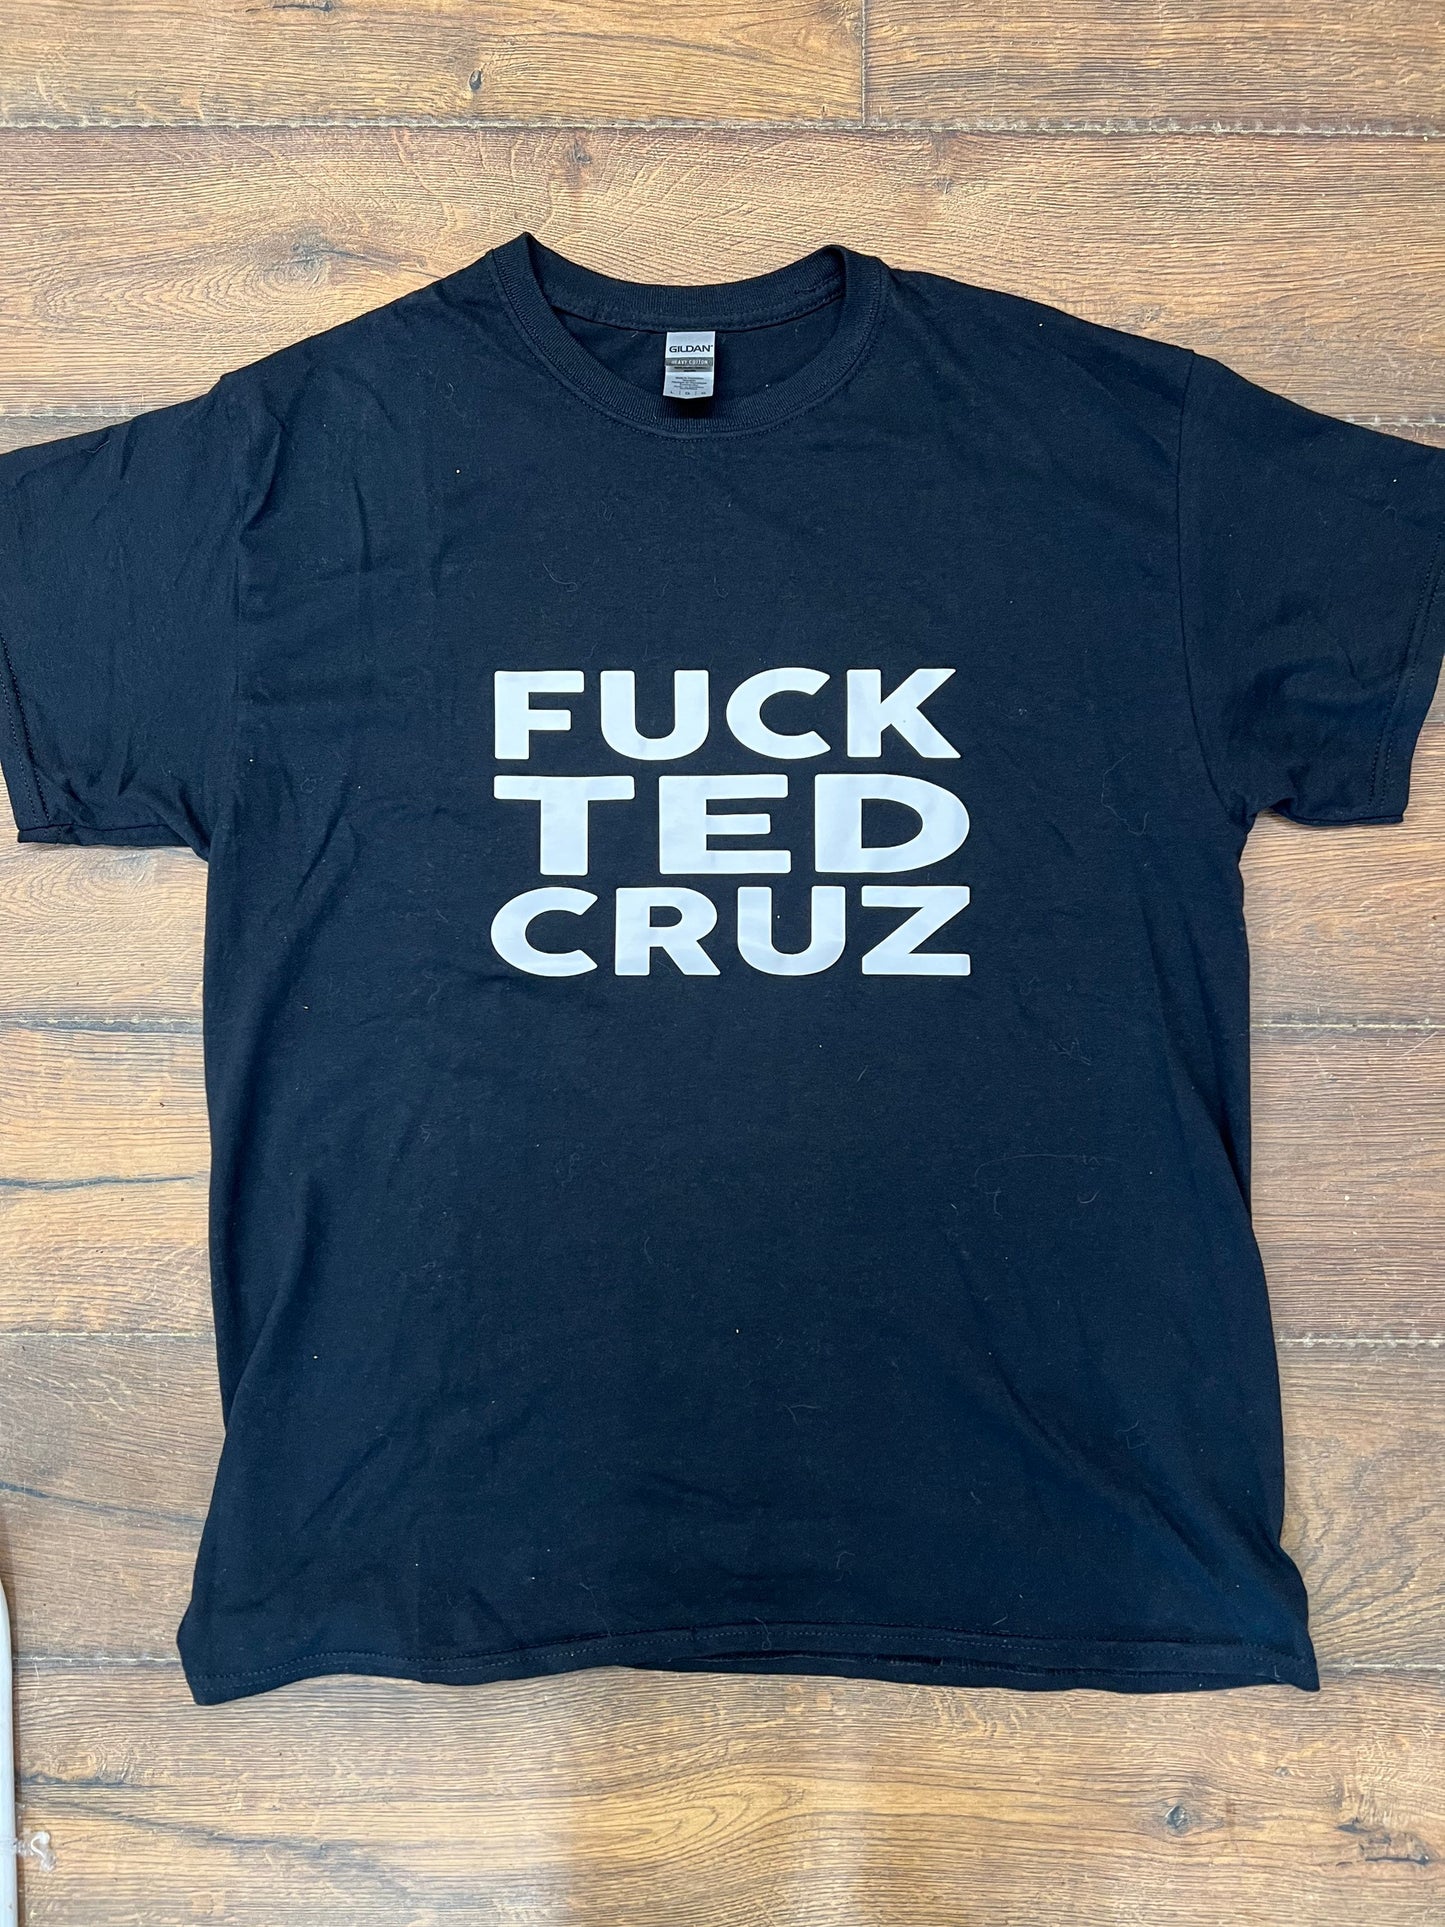 Fuck Ted Cruz and Fuck Greg Abbott too front and back SHIRT